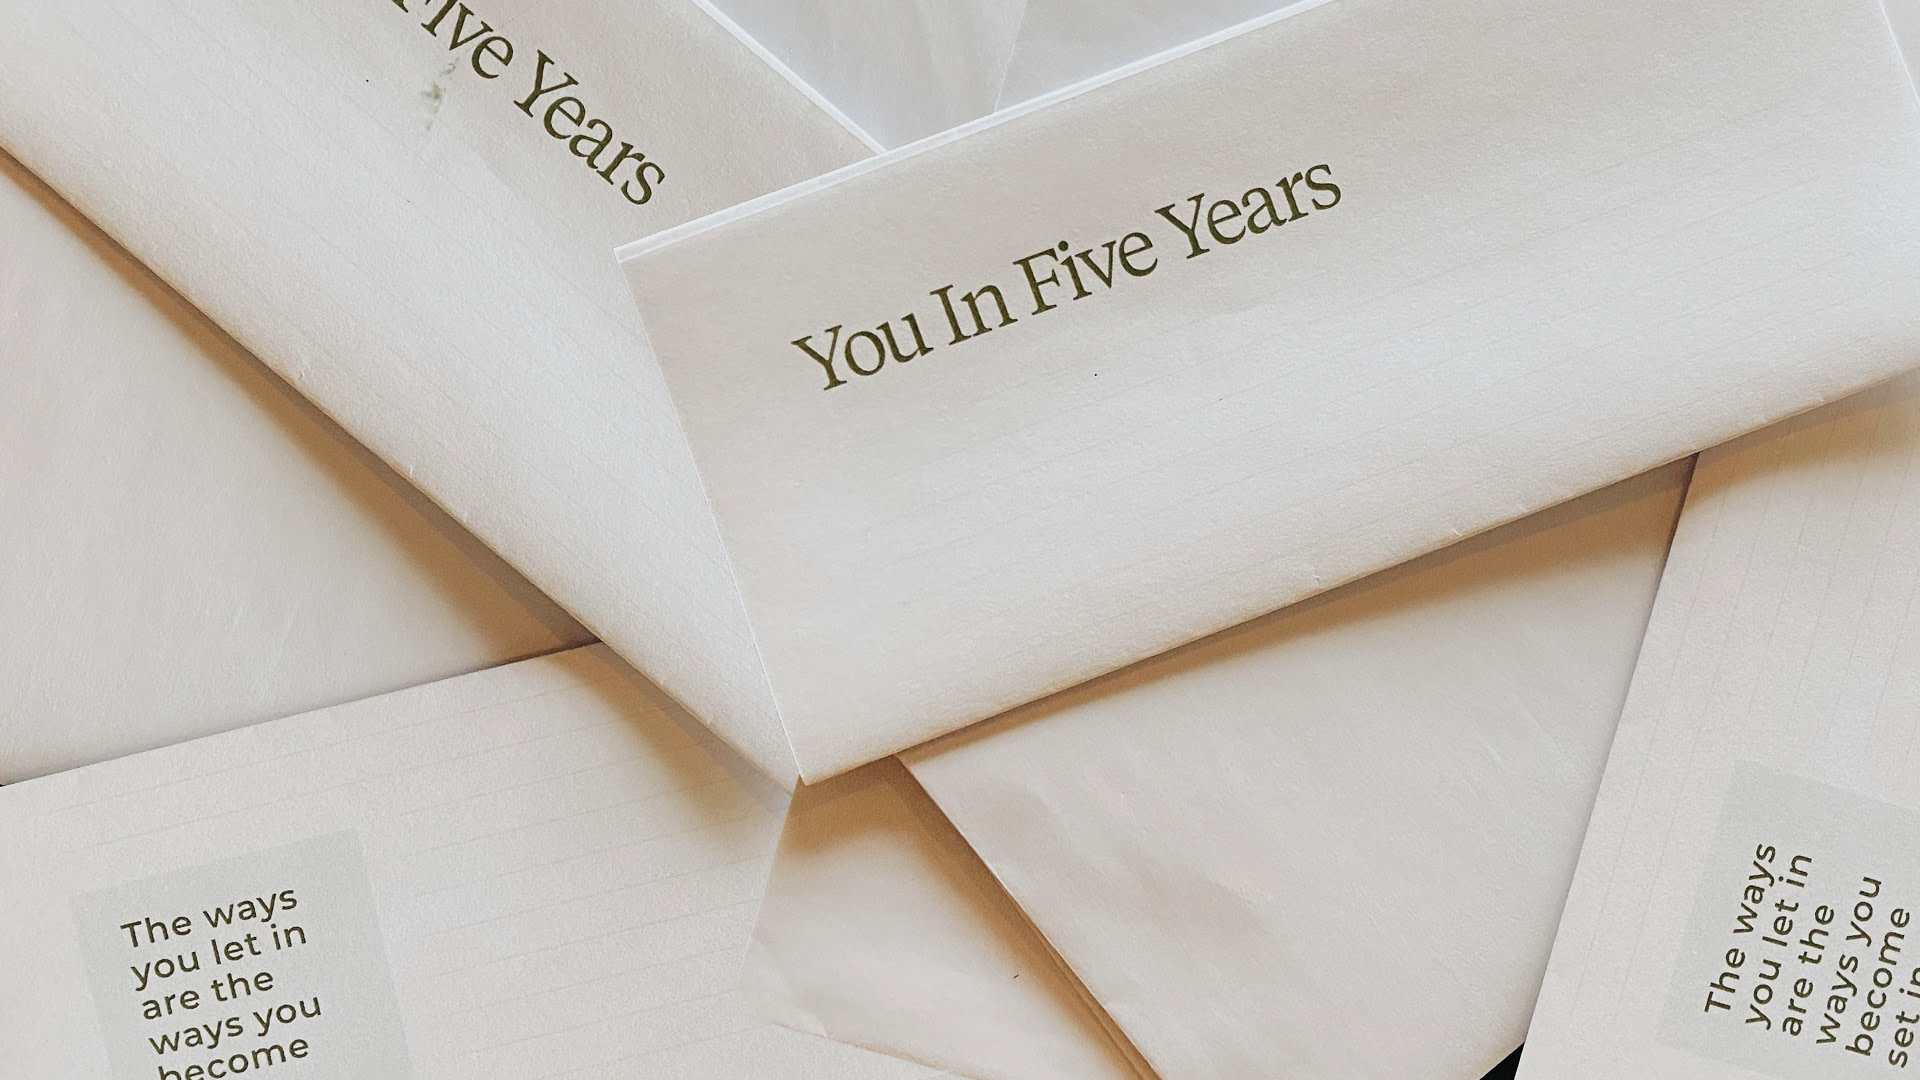 Pile of Envelopes that read You in Five Years